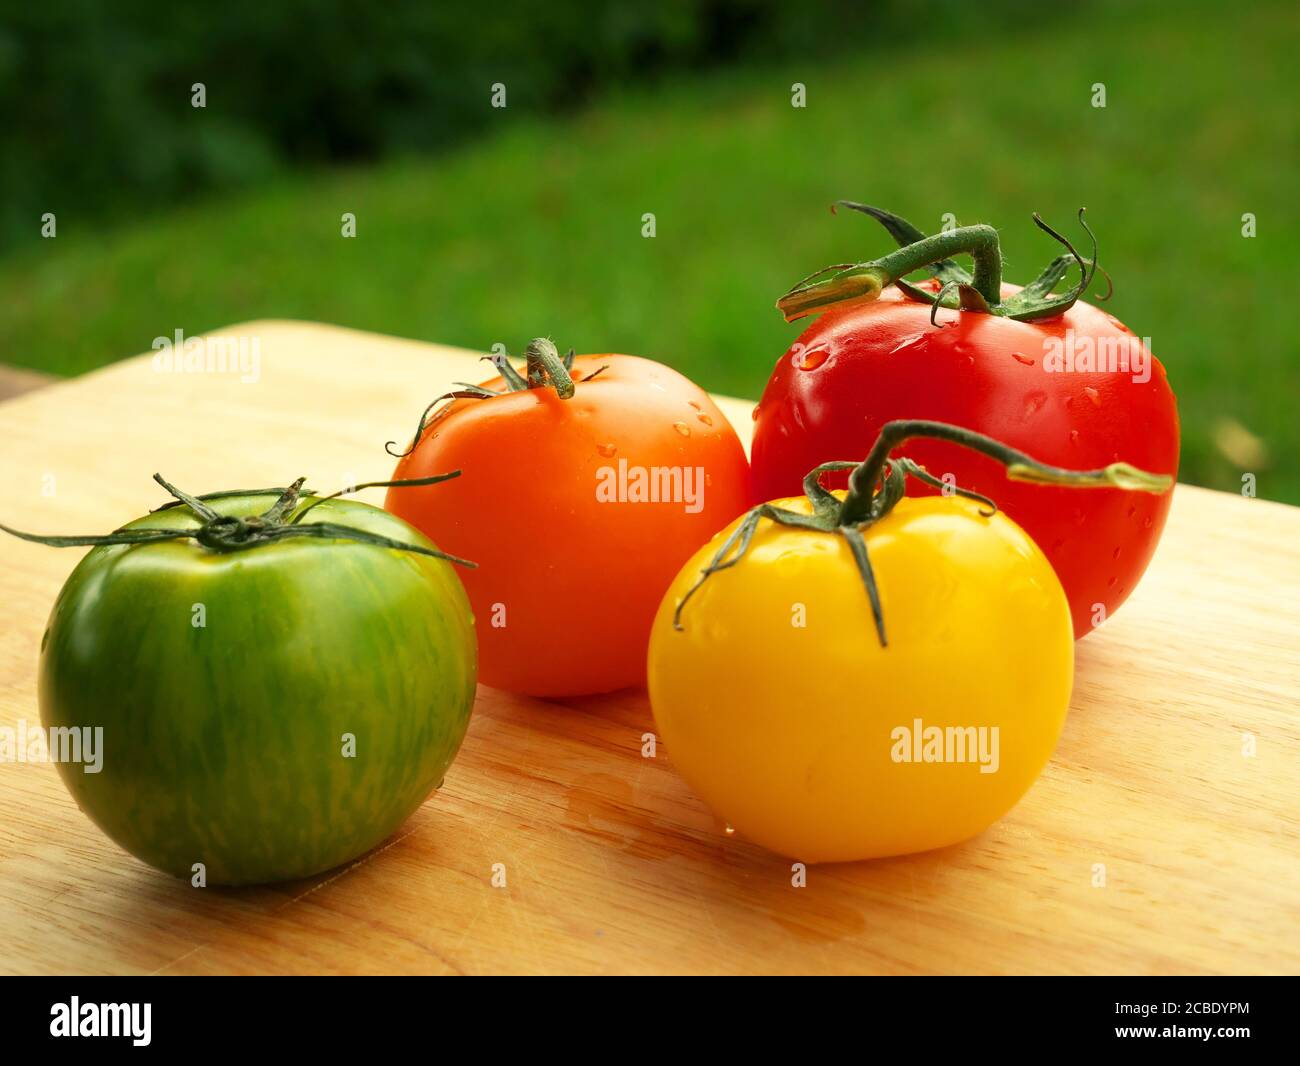 Close-up of green, orange, yellow and red tomatoes on a wooden table Stock Photo